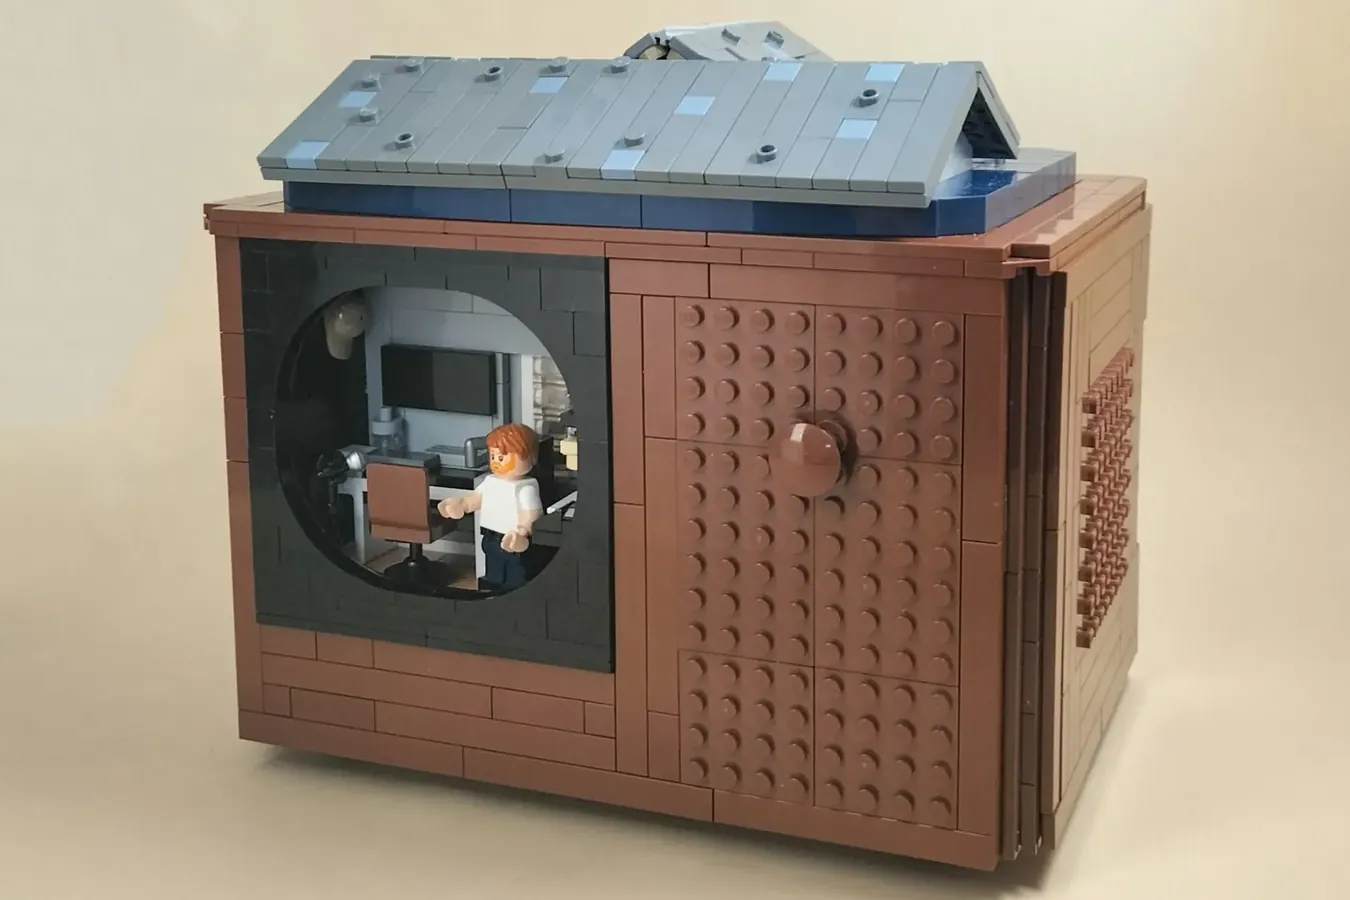 LEGO Ideas Happier Than Ever project